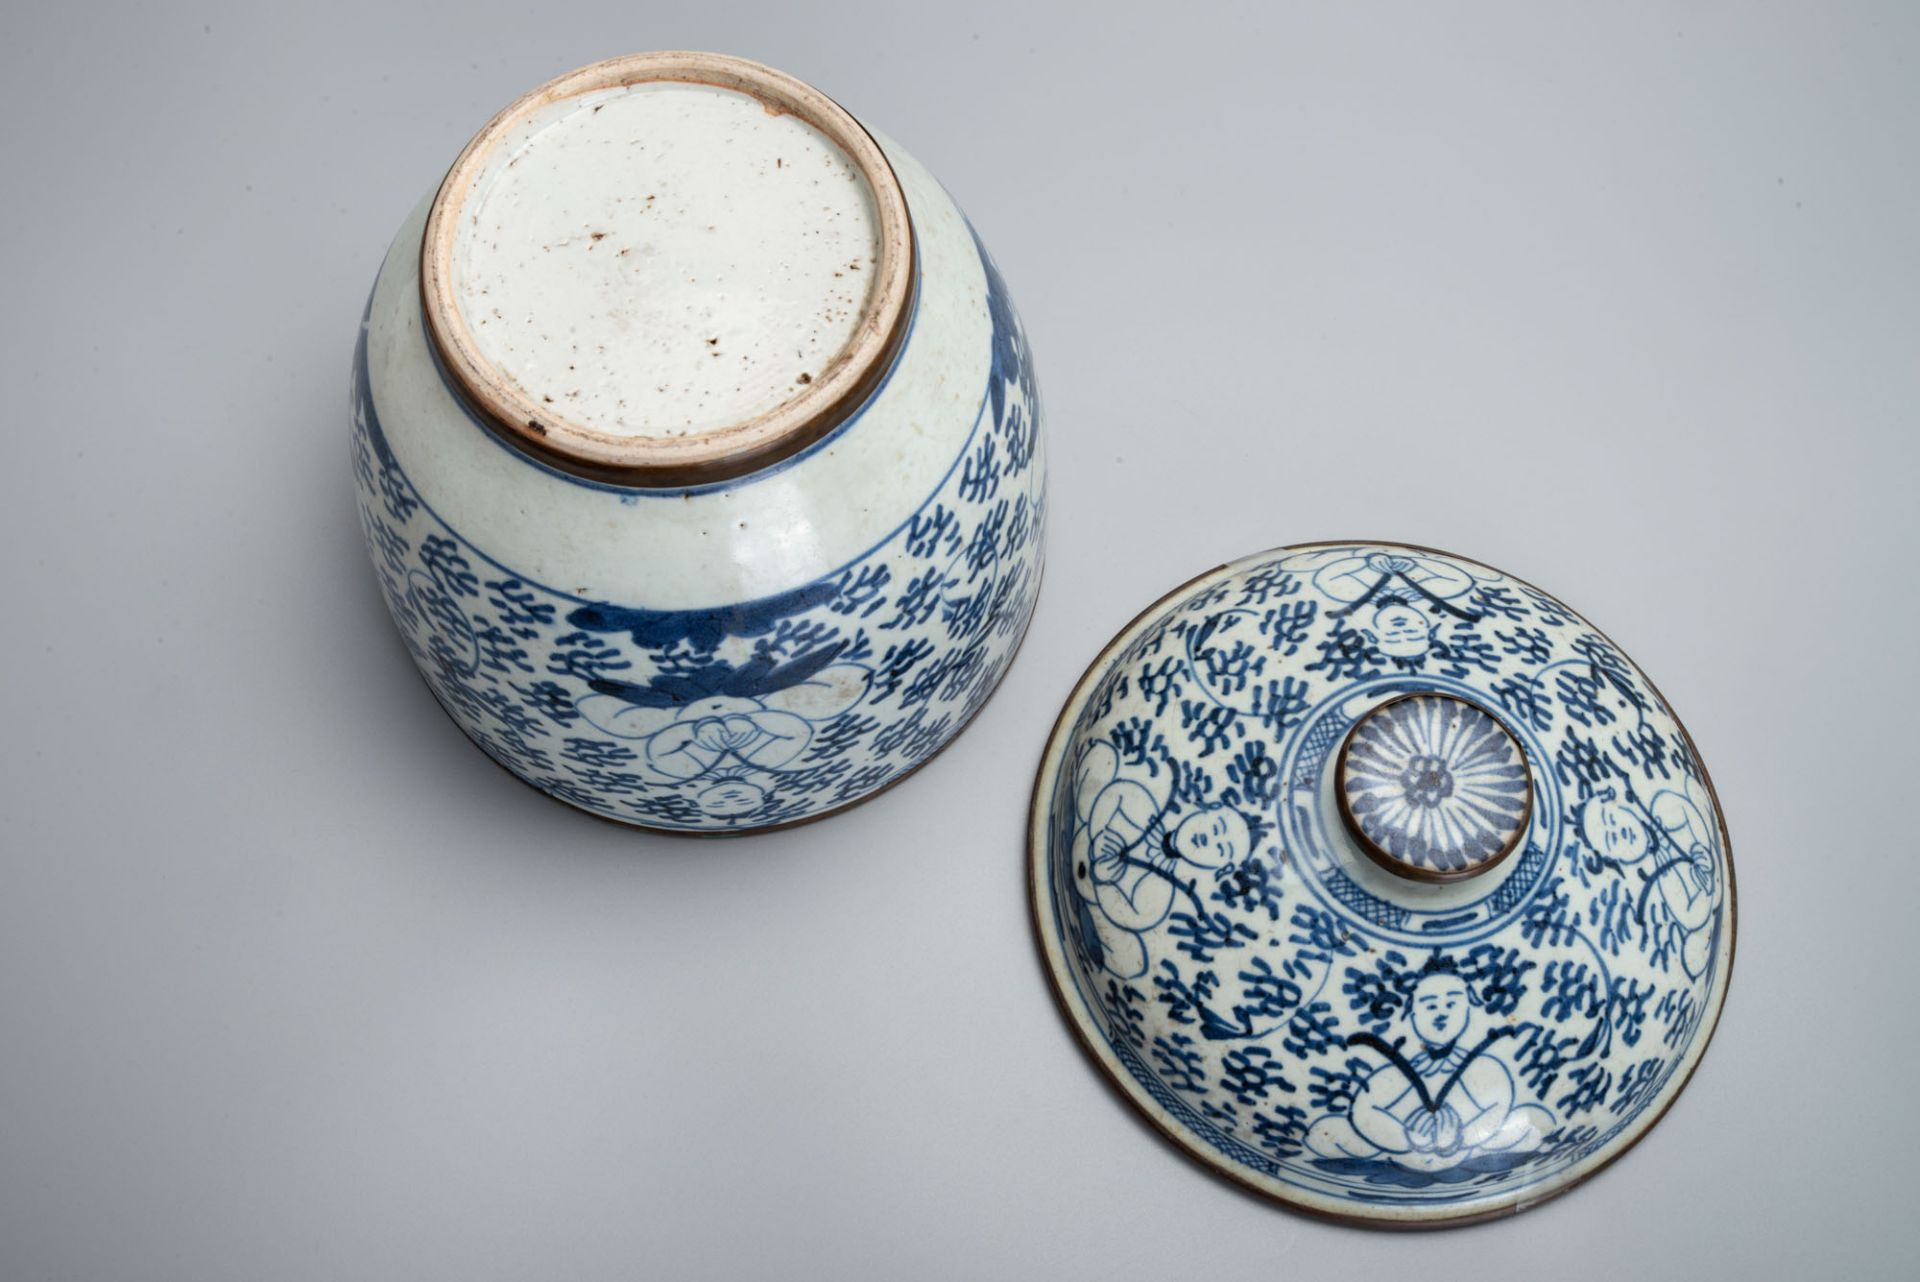 A Rare Blue and White Porcelain Lidded Jar, China, Qing Dynasty, 18th century - Image 5 of 5